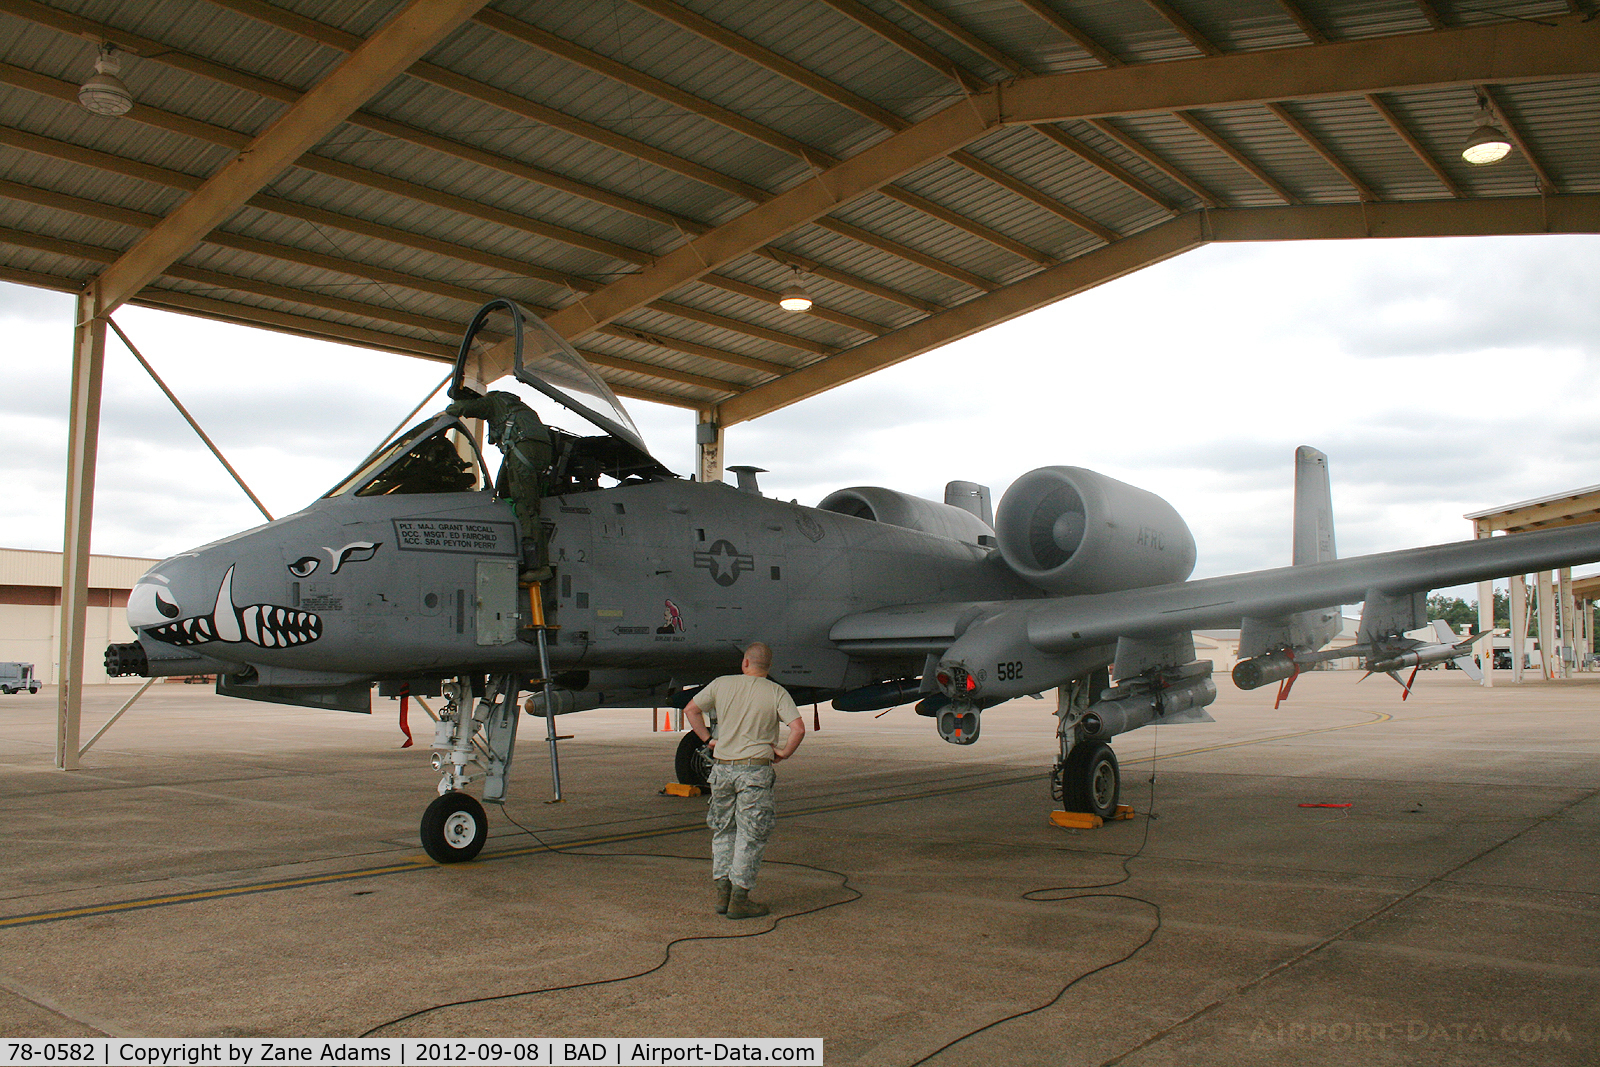 78-0582, 1978 Fairchild Republic A-10C Thunderbolt II C/N A10-0202, At Barksdale Air Force Base -47th Fighter Squadron